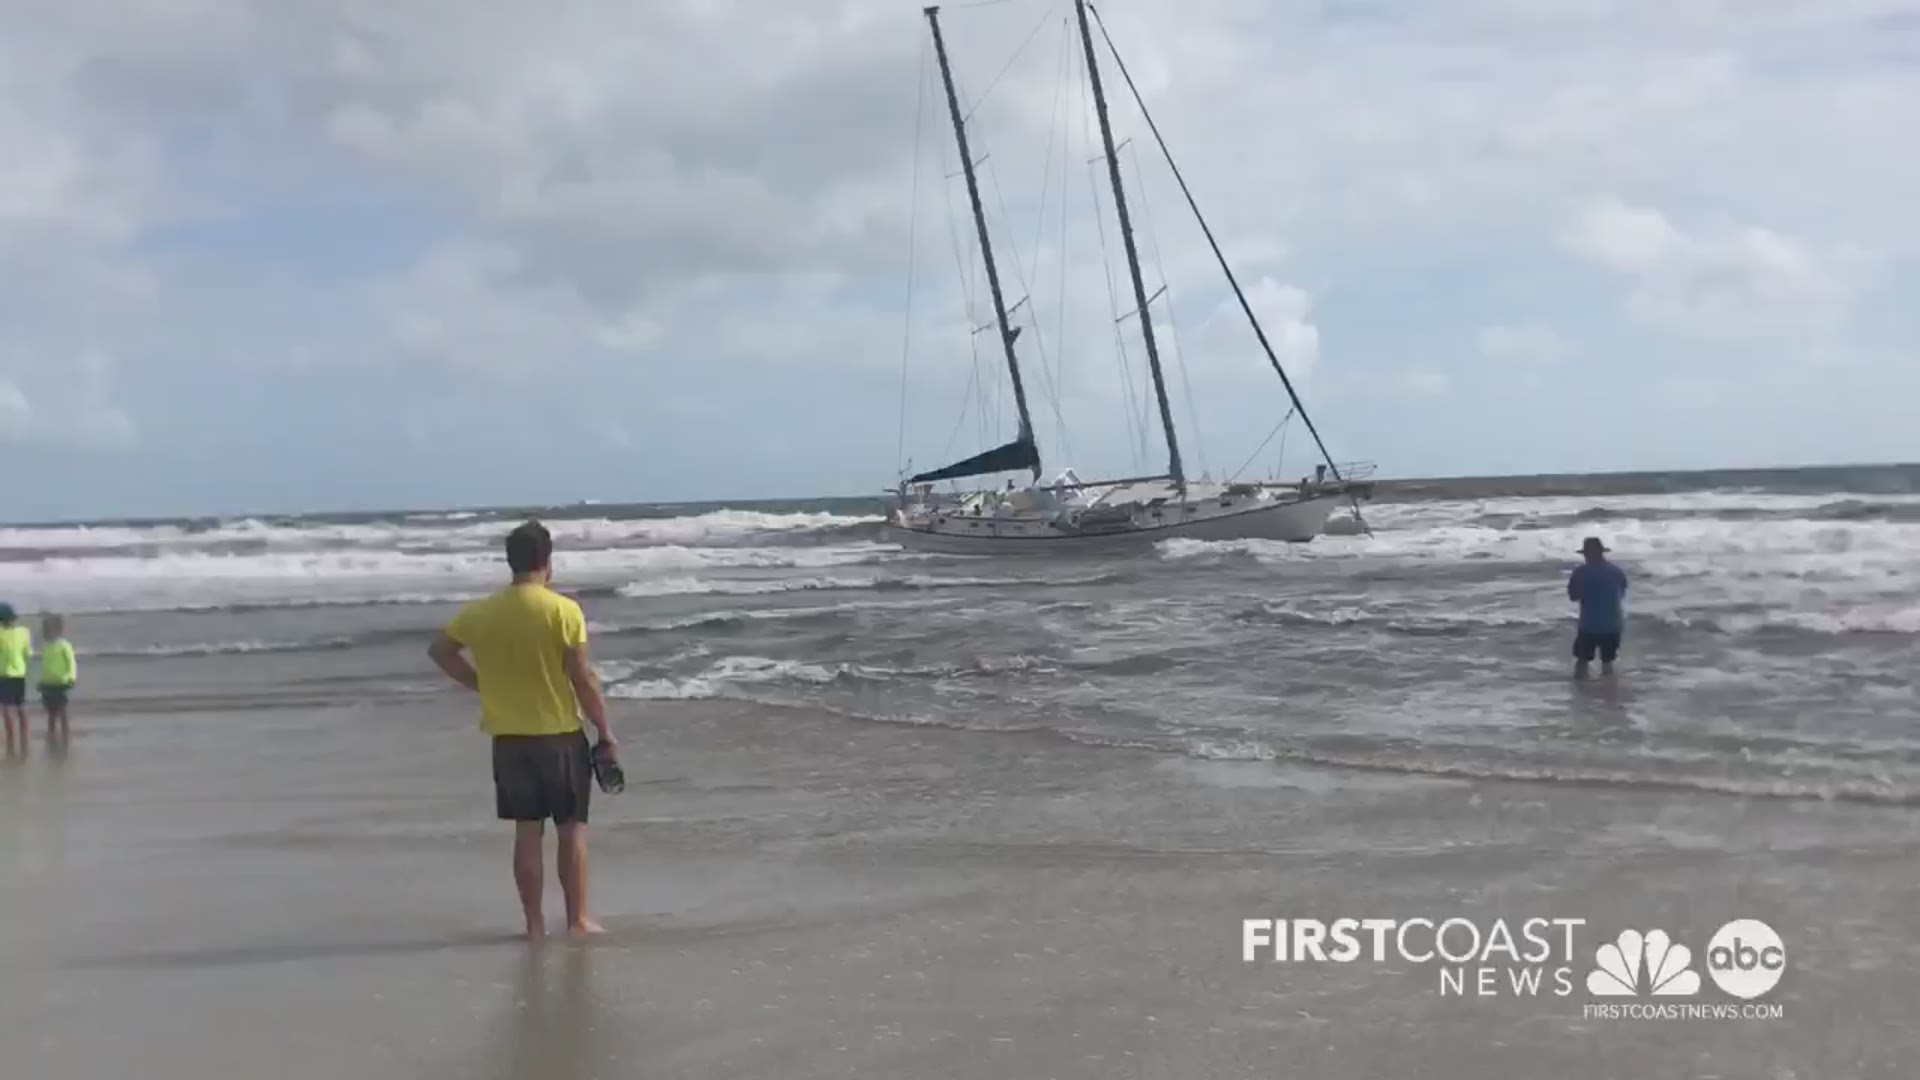 Crews are still working to remove the boat from the area, according to the Atlantic Beach Police Department.